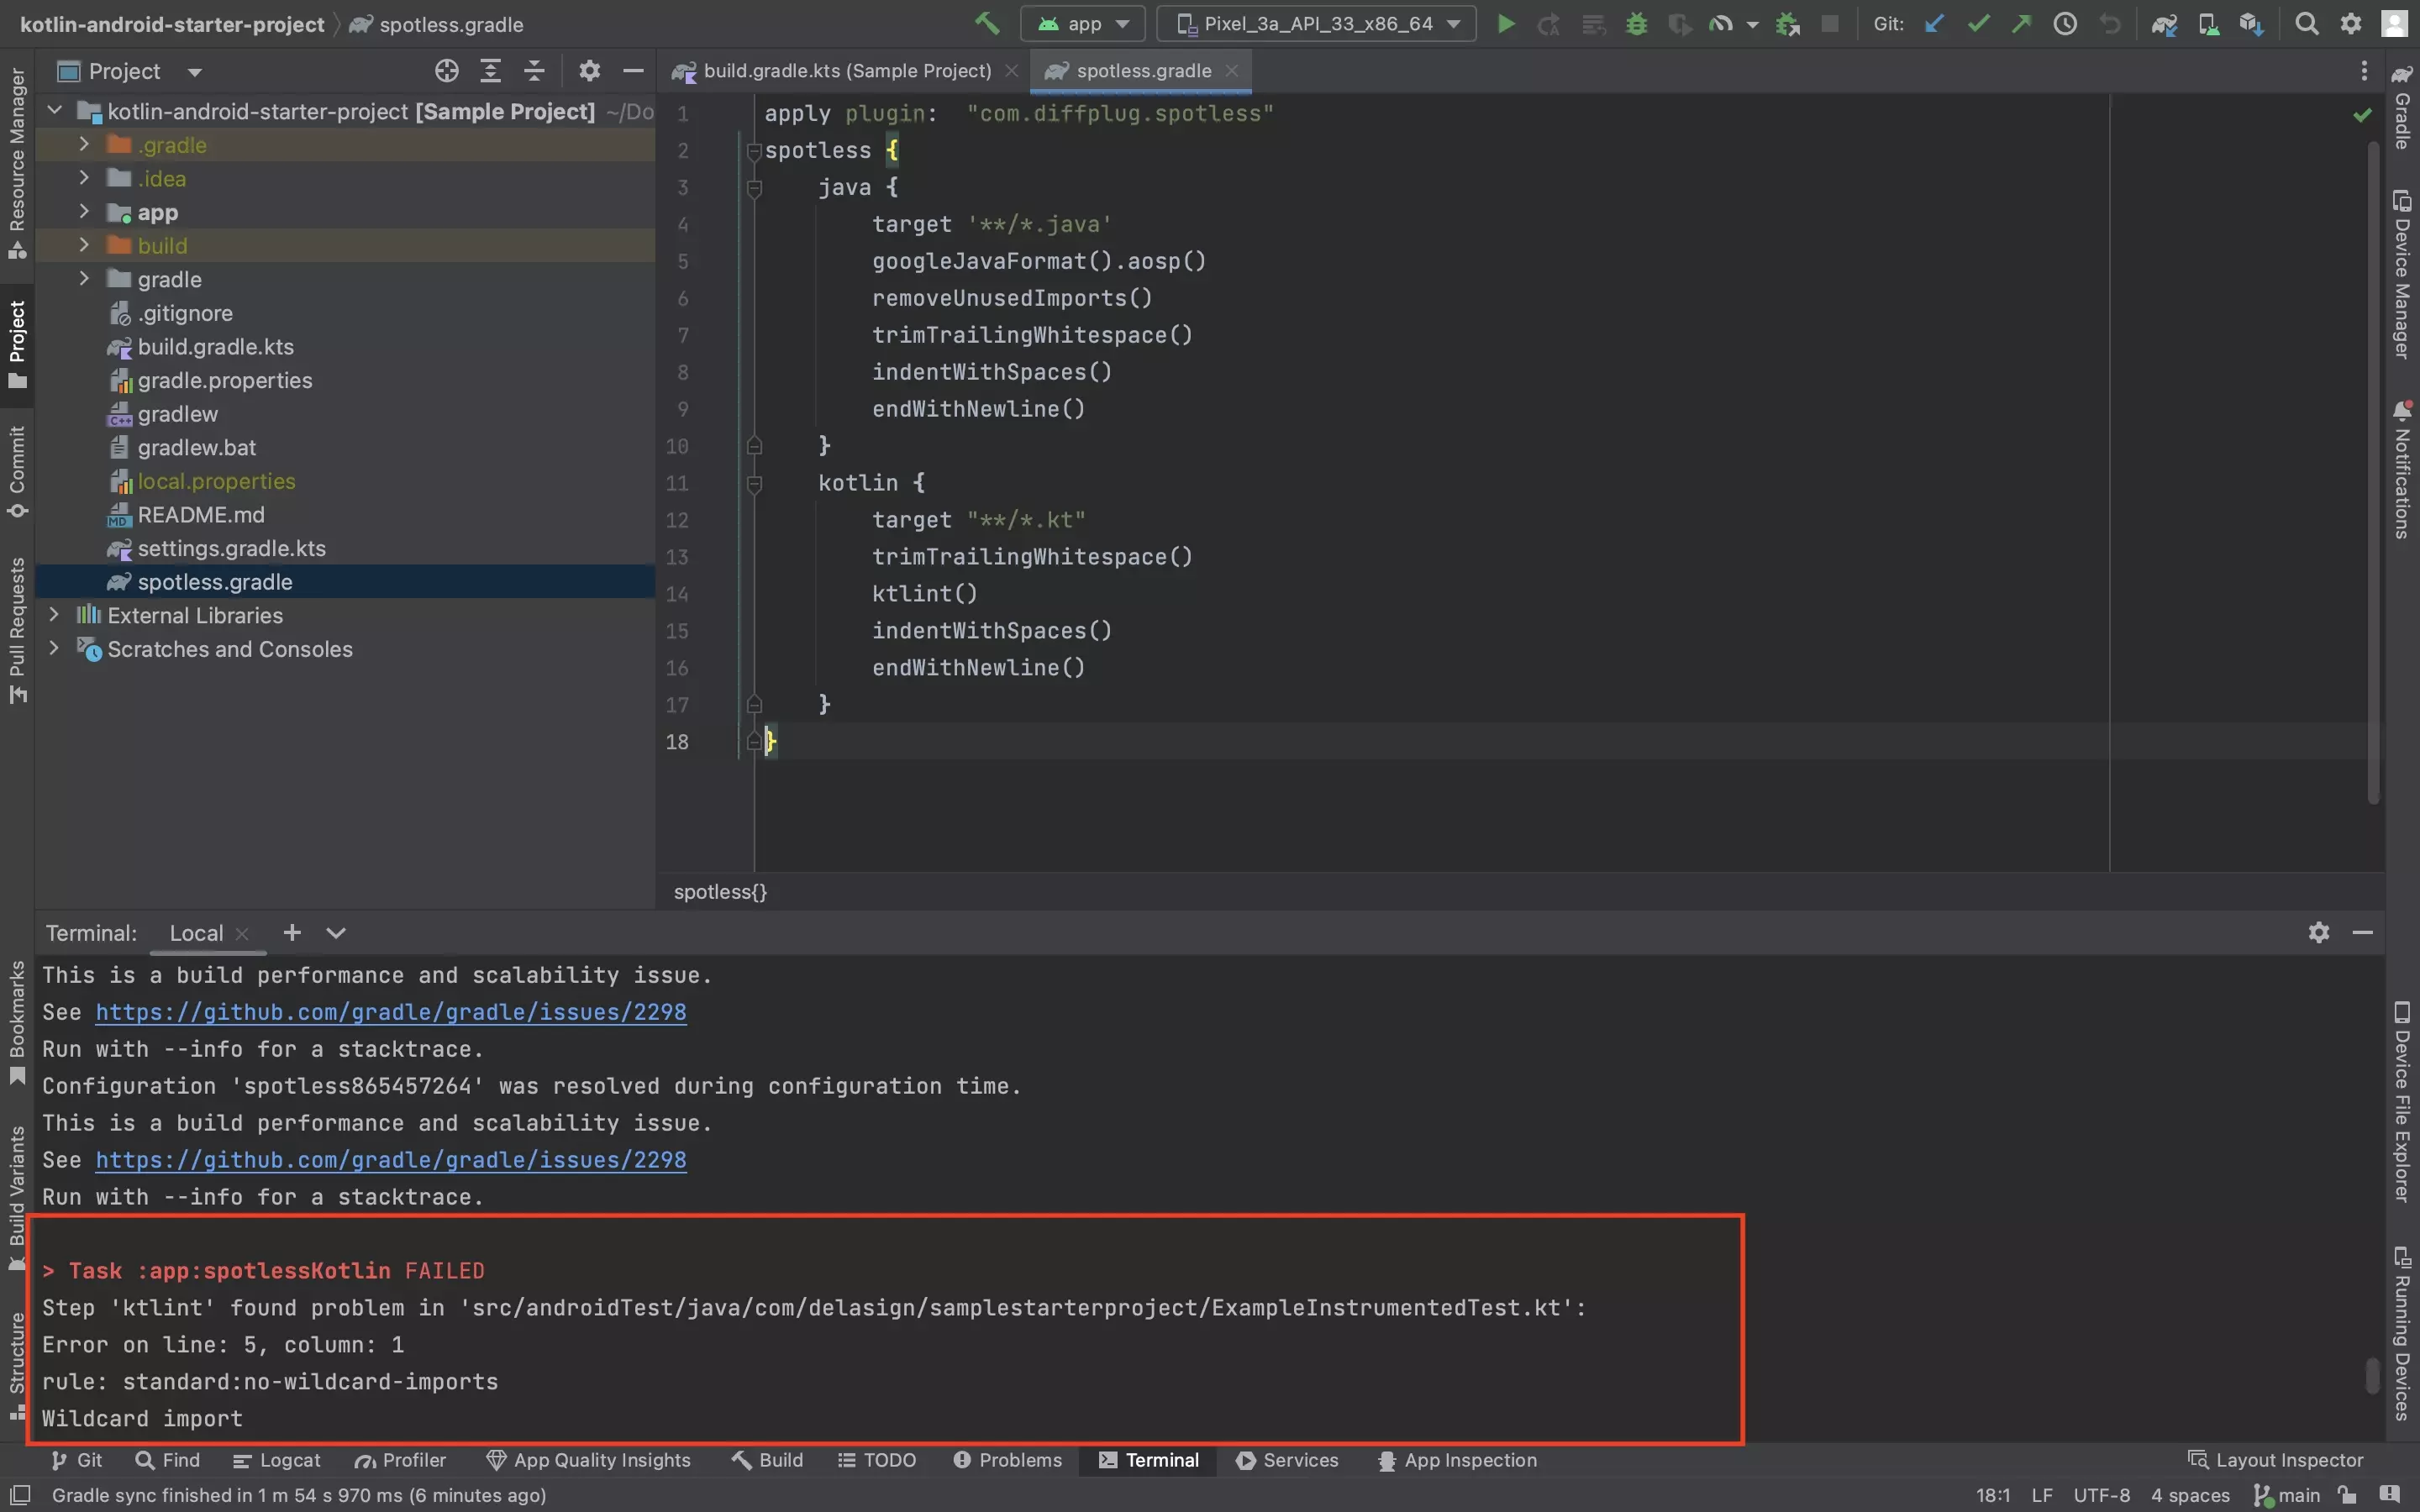 A screenshot of Android Studio with the Terminal open, showing that the test of the Spotless check failed along with the message that it gives - letting you know how to fix the issue.